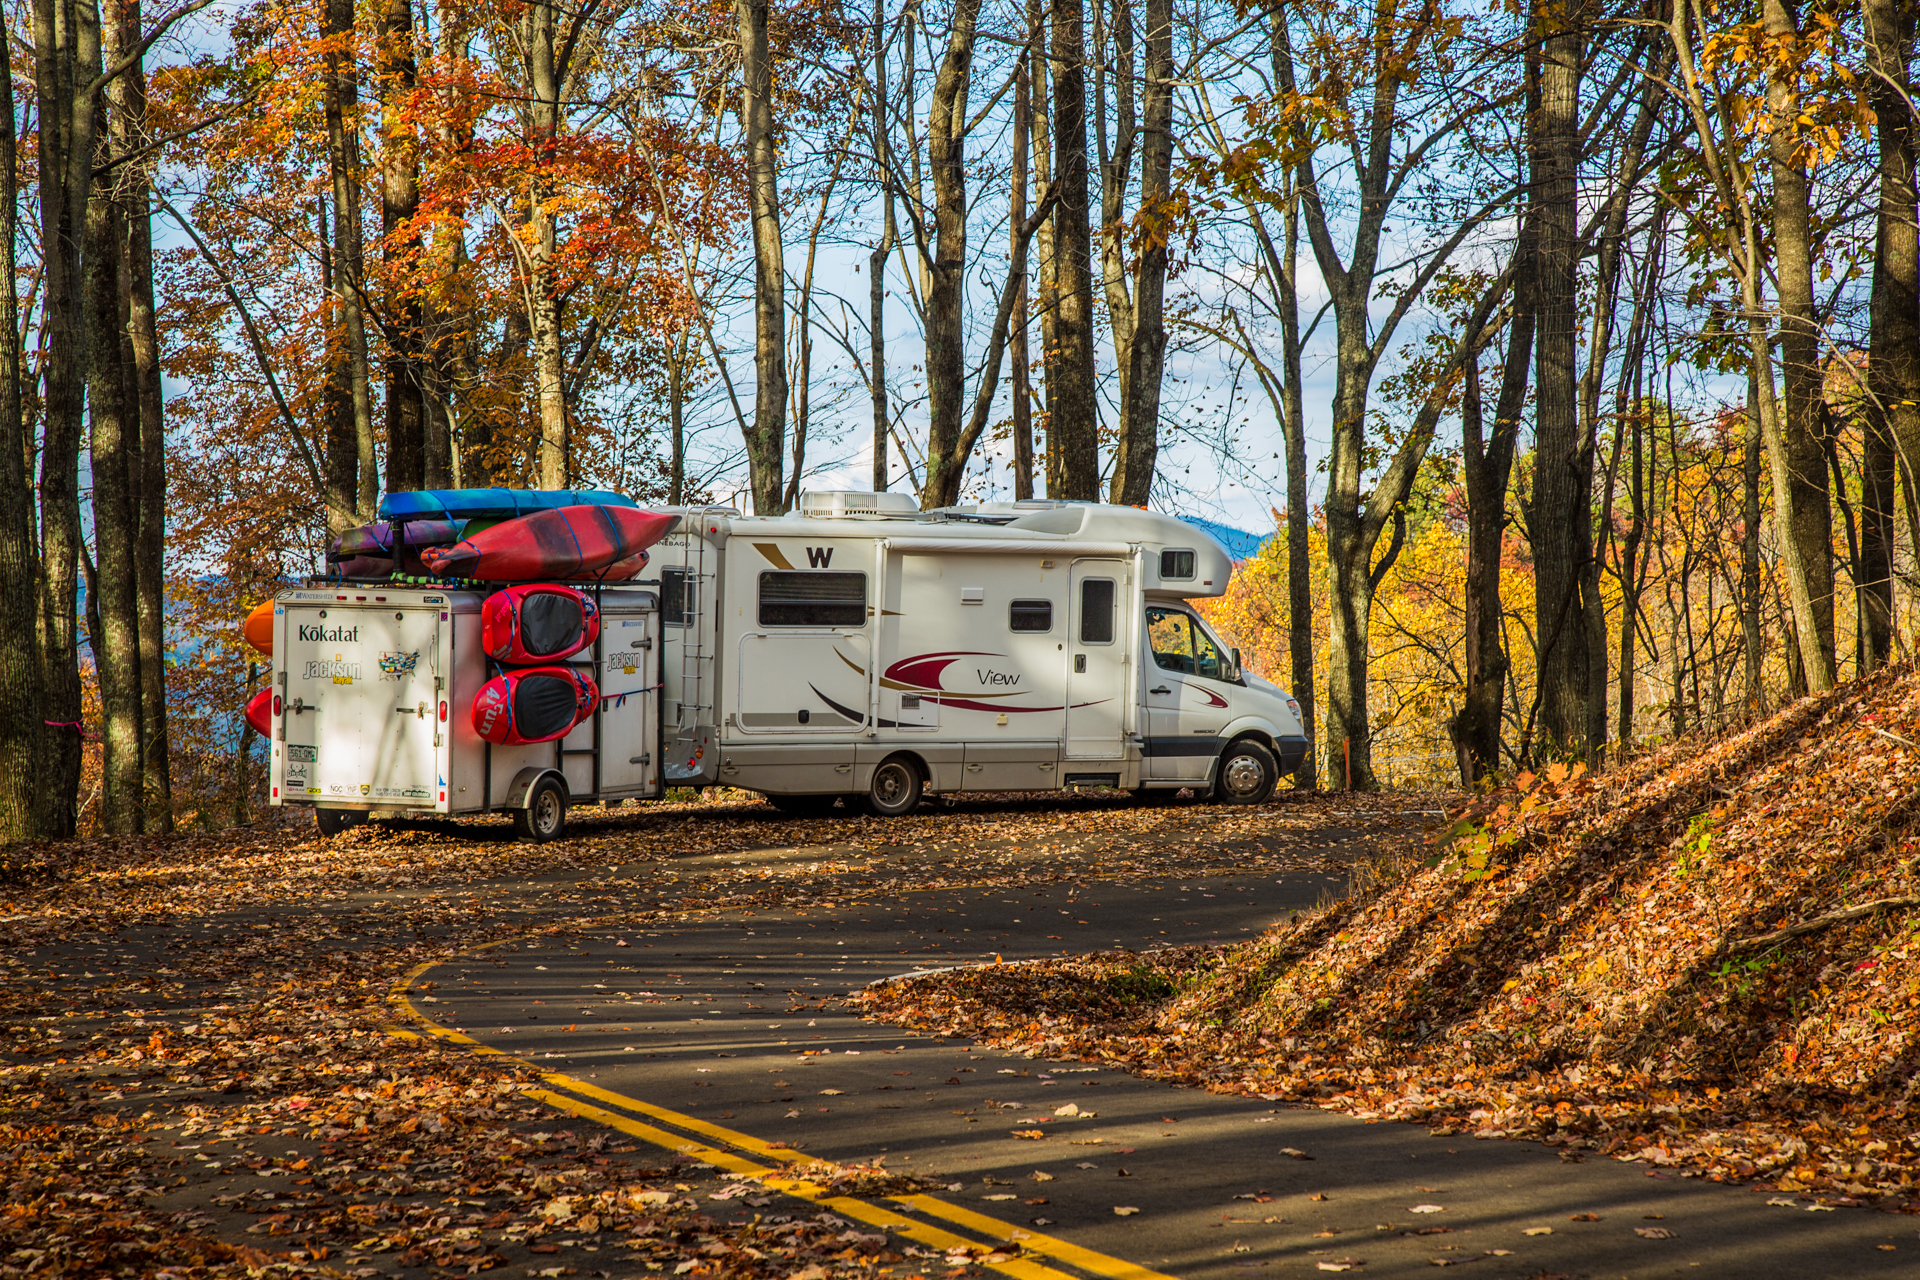 Winnebago View with trailer attached parked along the side of the road among fallen leaves.